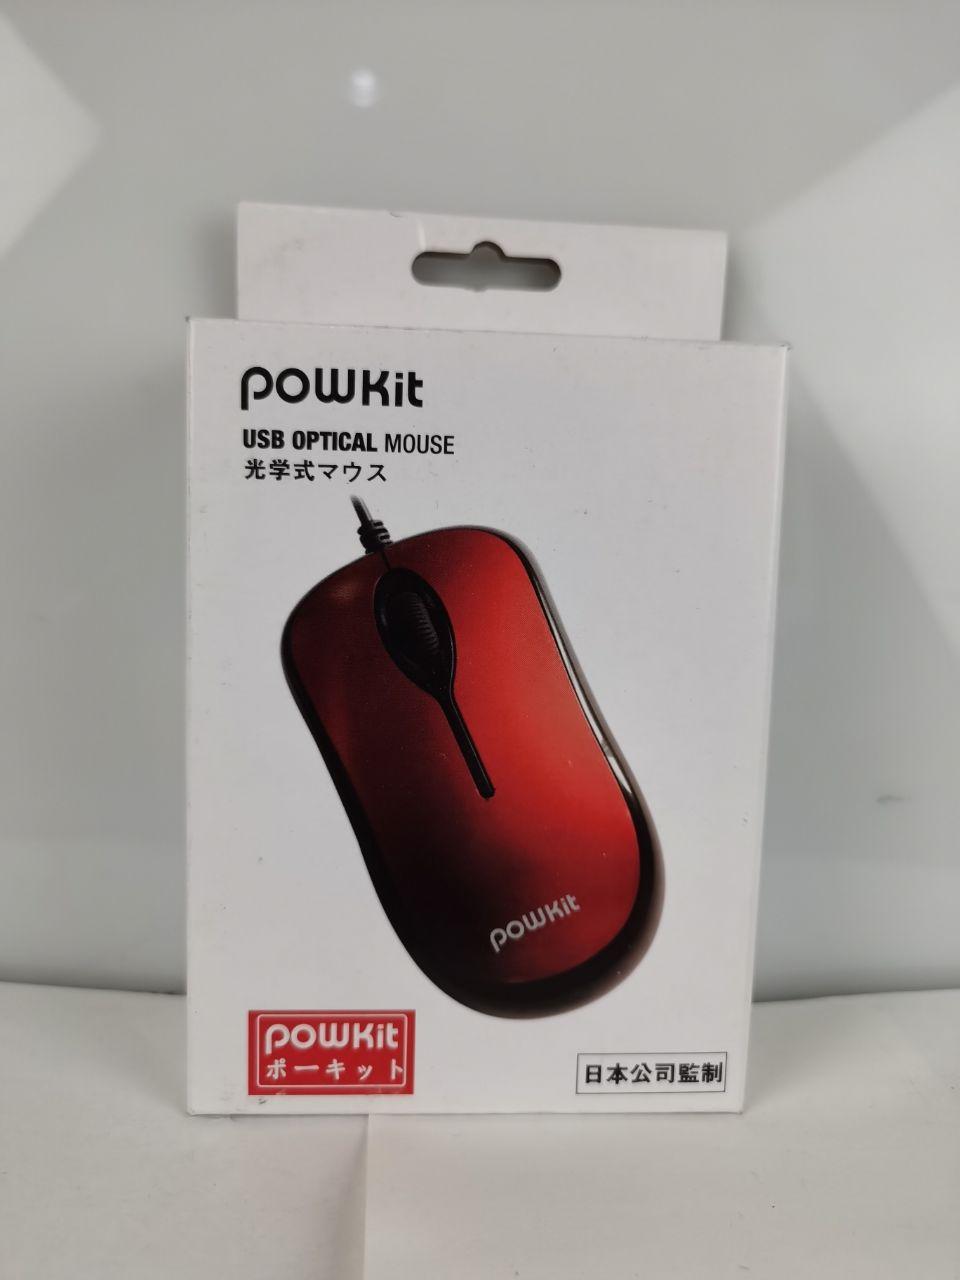 gigaware wireless optical mouse 26-1424